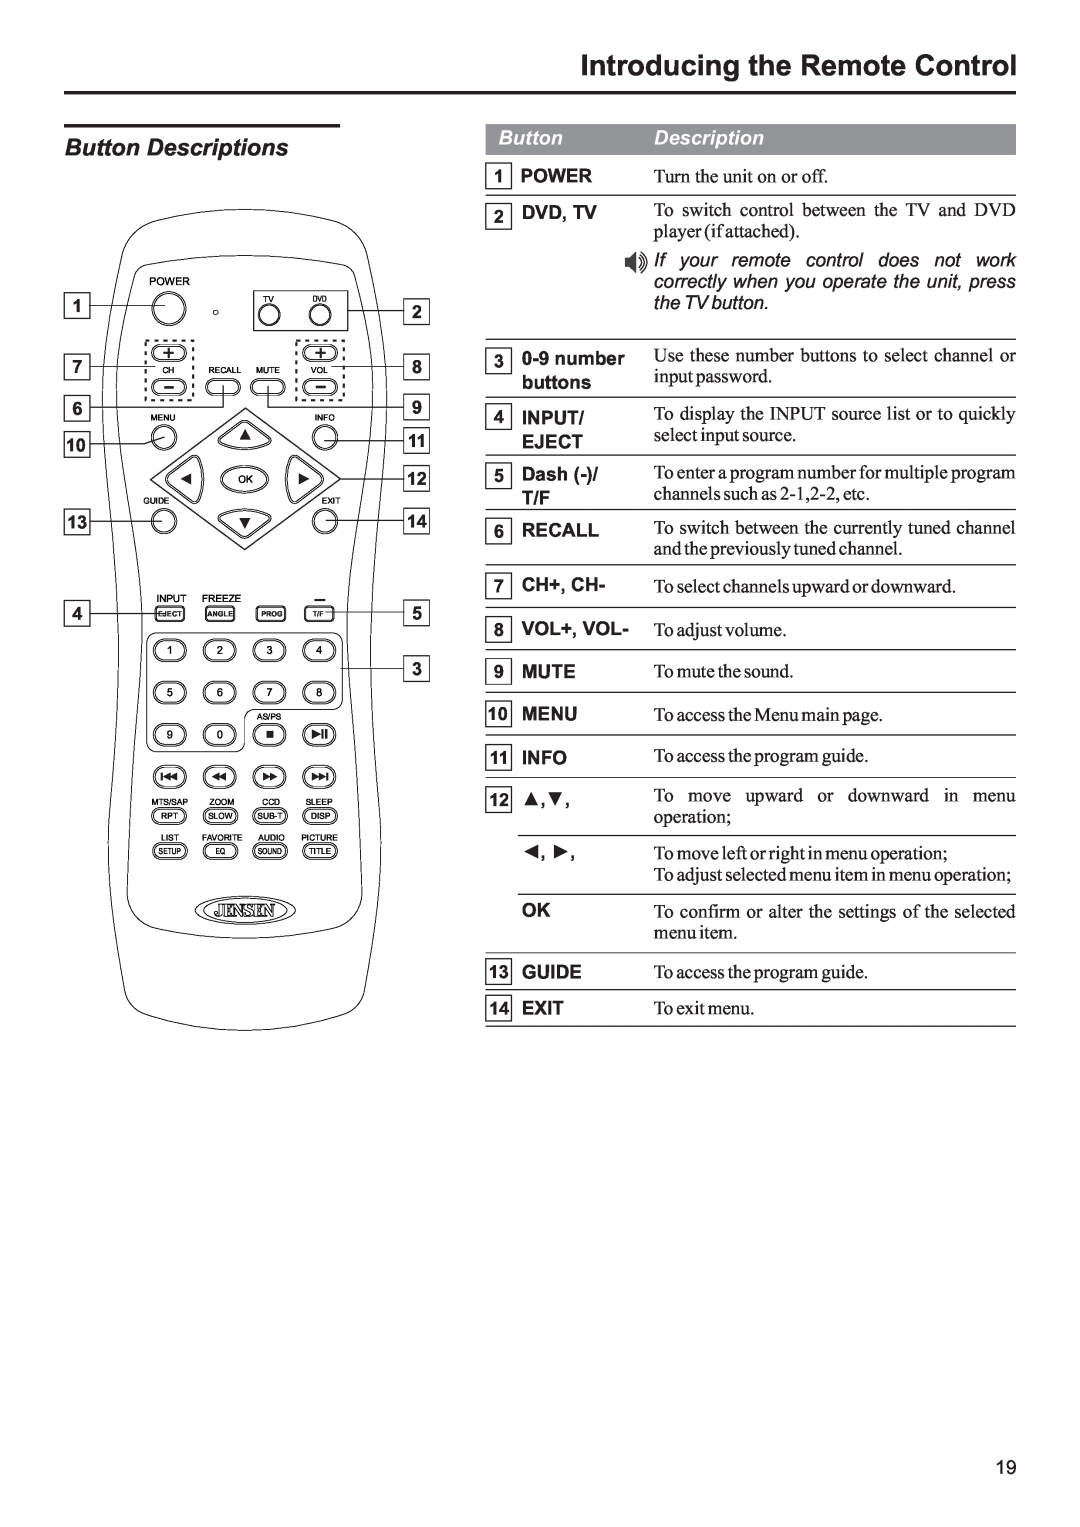 Jensen JE3207 Button Descriptions, Introducing the Remote Control, If your remote control does not work, the TV button 